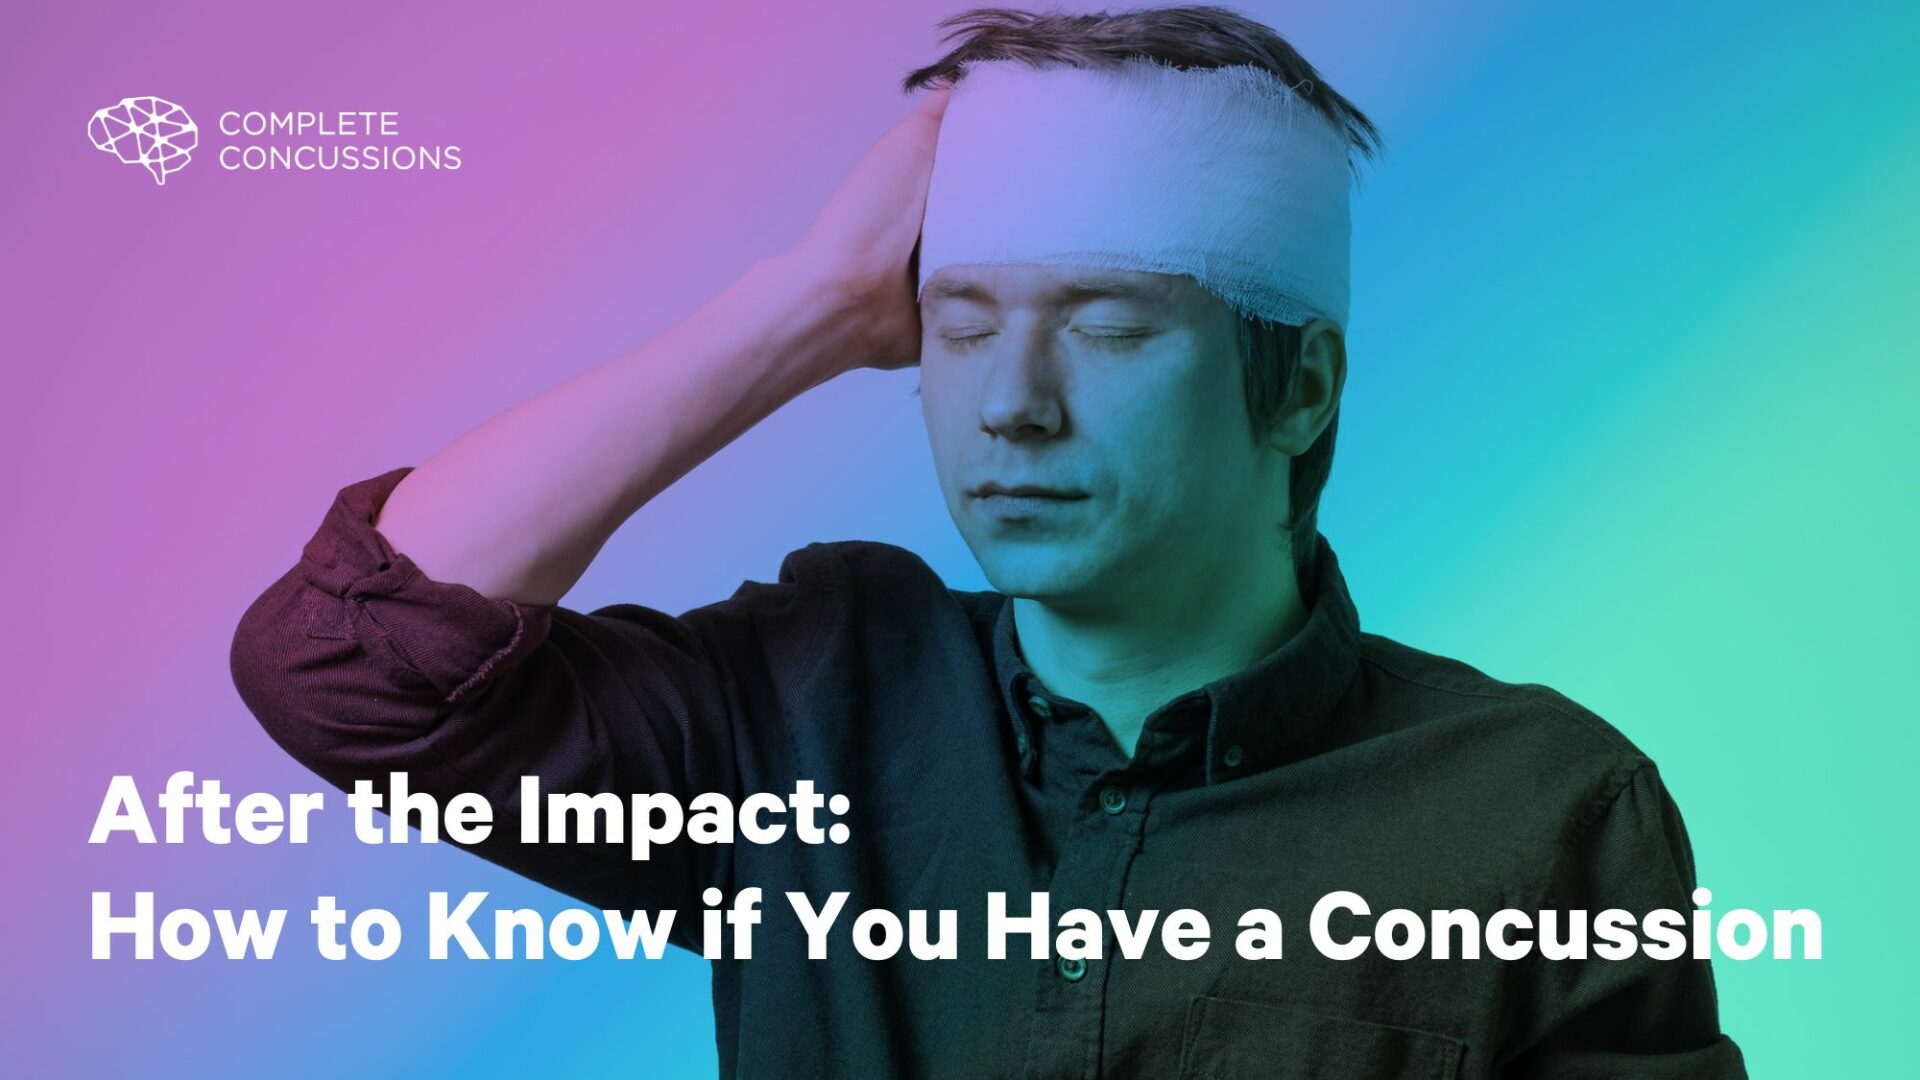 After the Impact: How to Know if You Have a Concussion